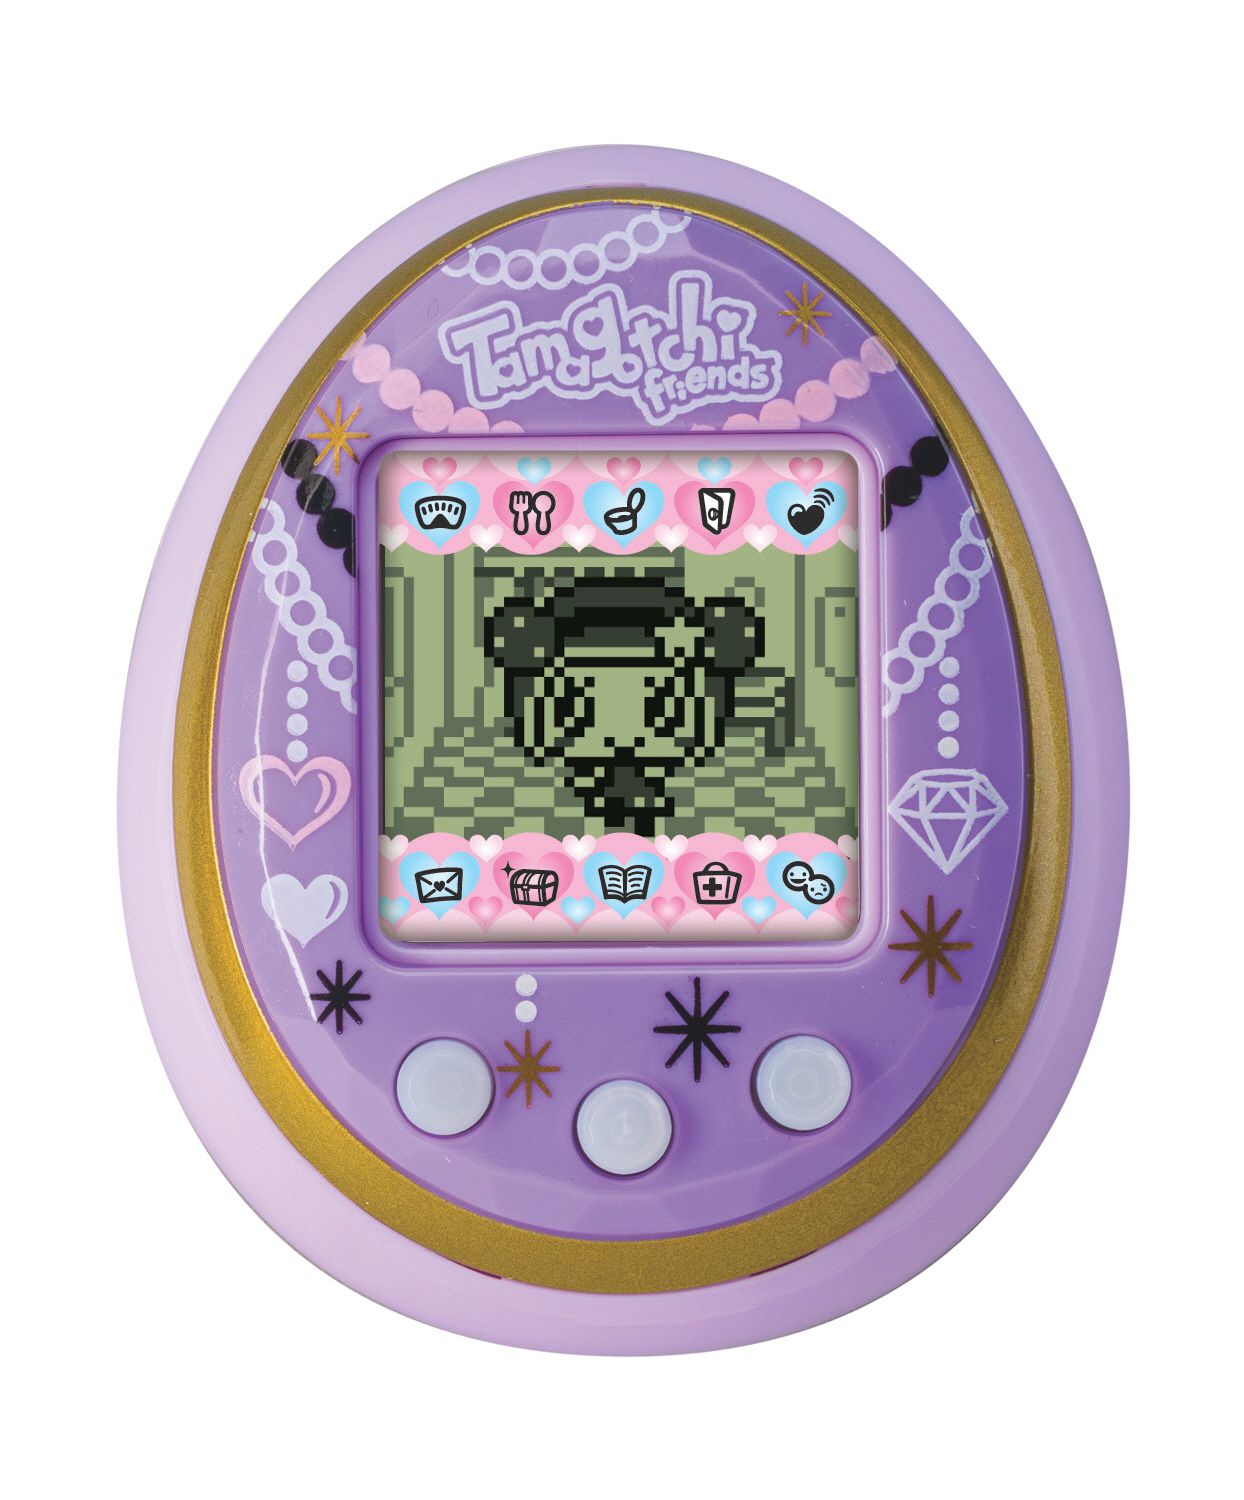 Tamagotchi Friends Jewelry-themed Digital Device on shelves now at Toys 'R' Us Stores nationwide.